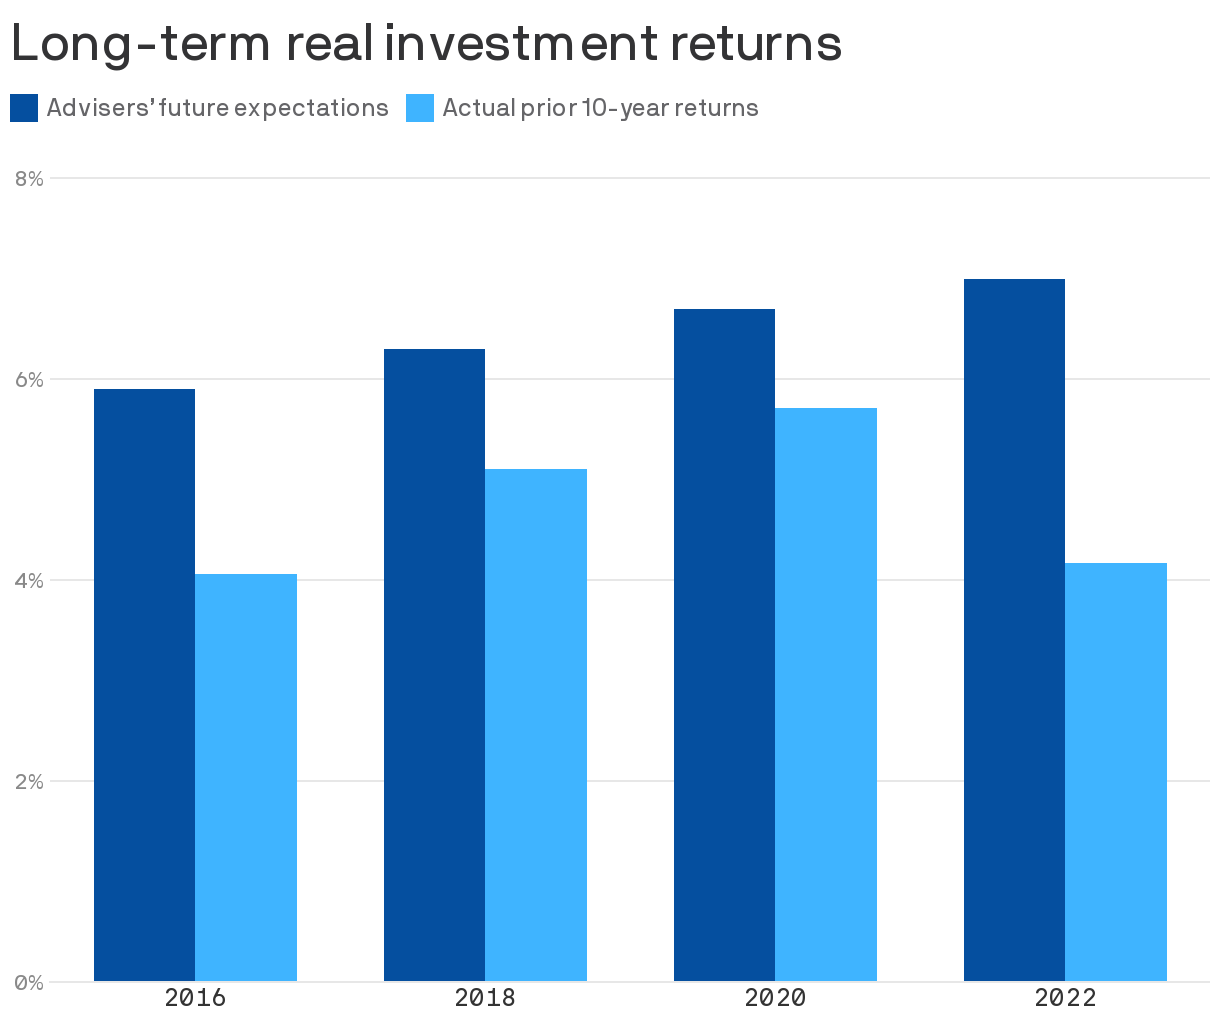 Long-term real investment returns